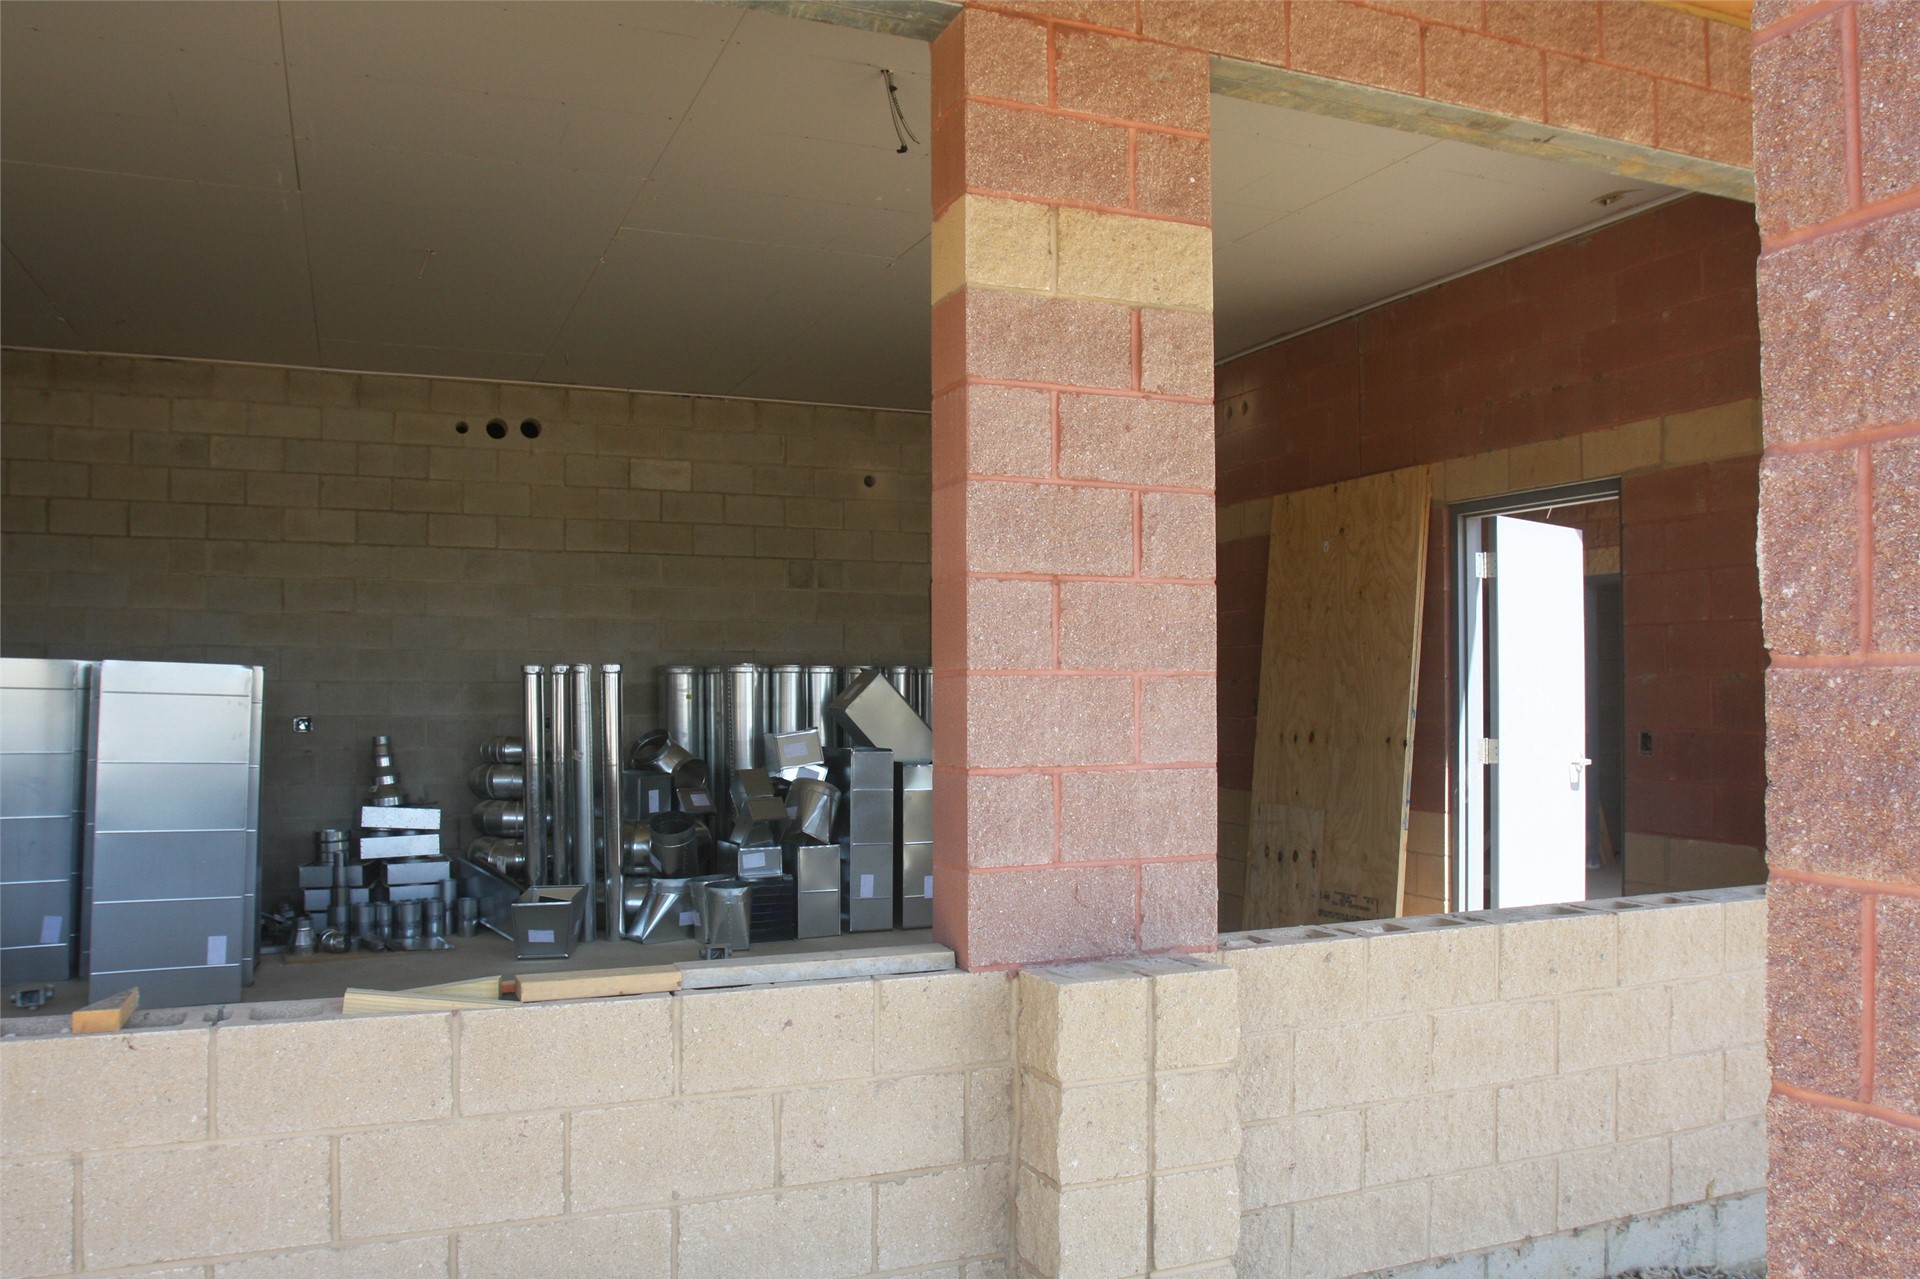 The east window of the concession stand